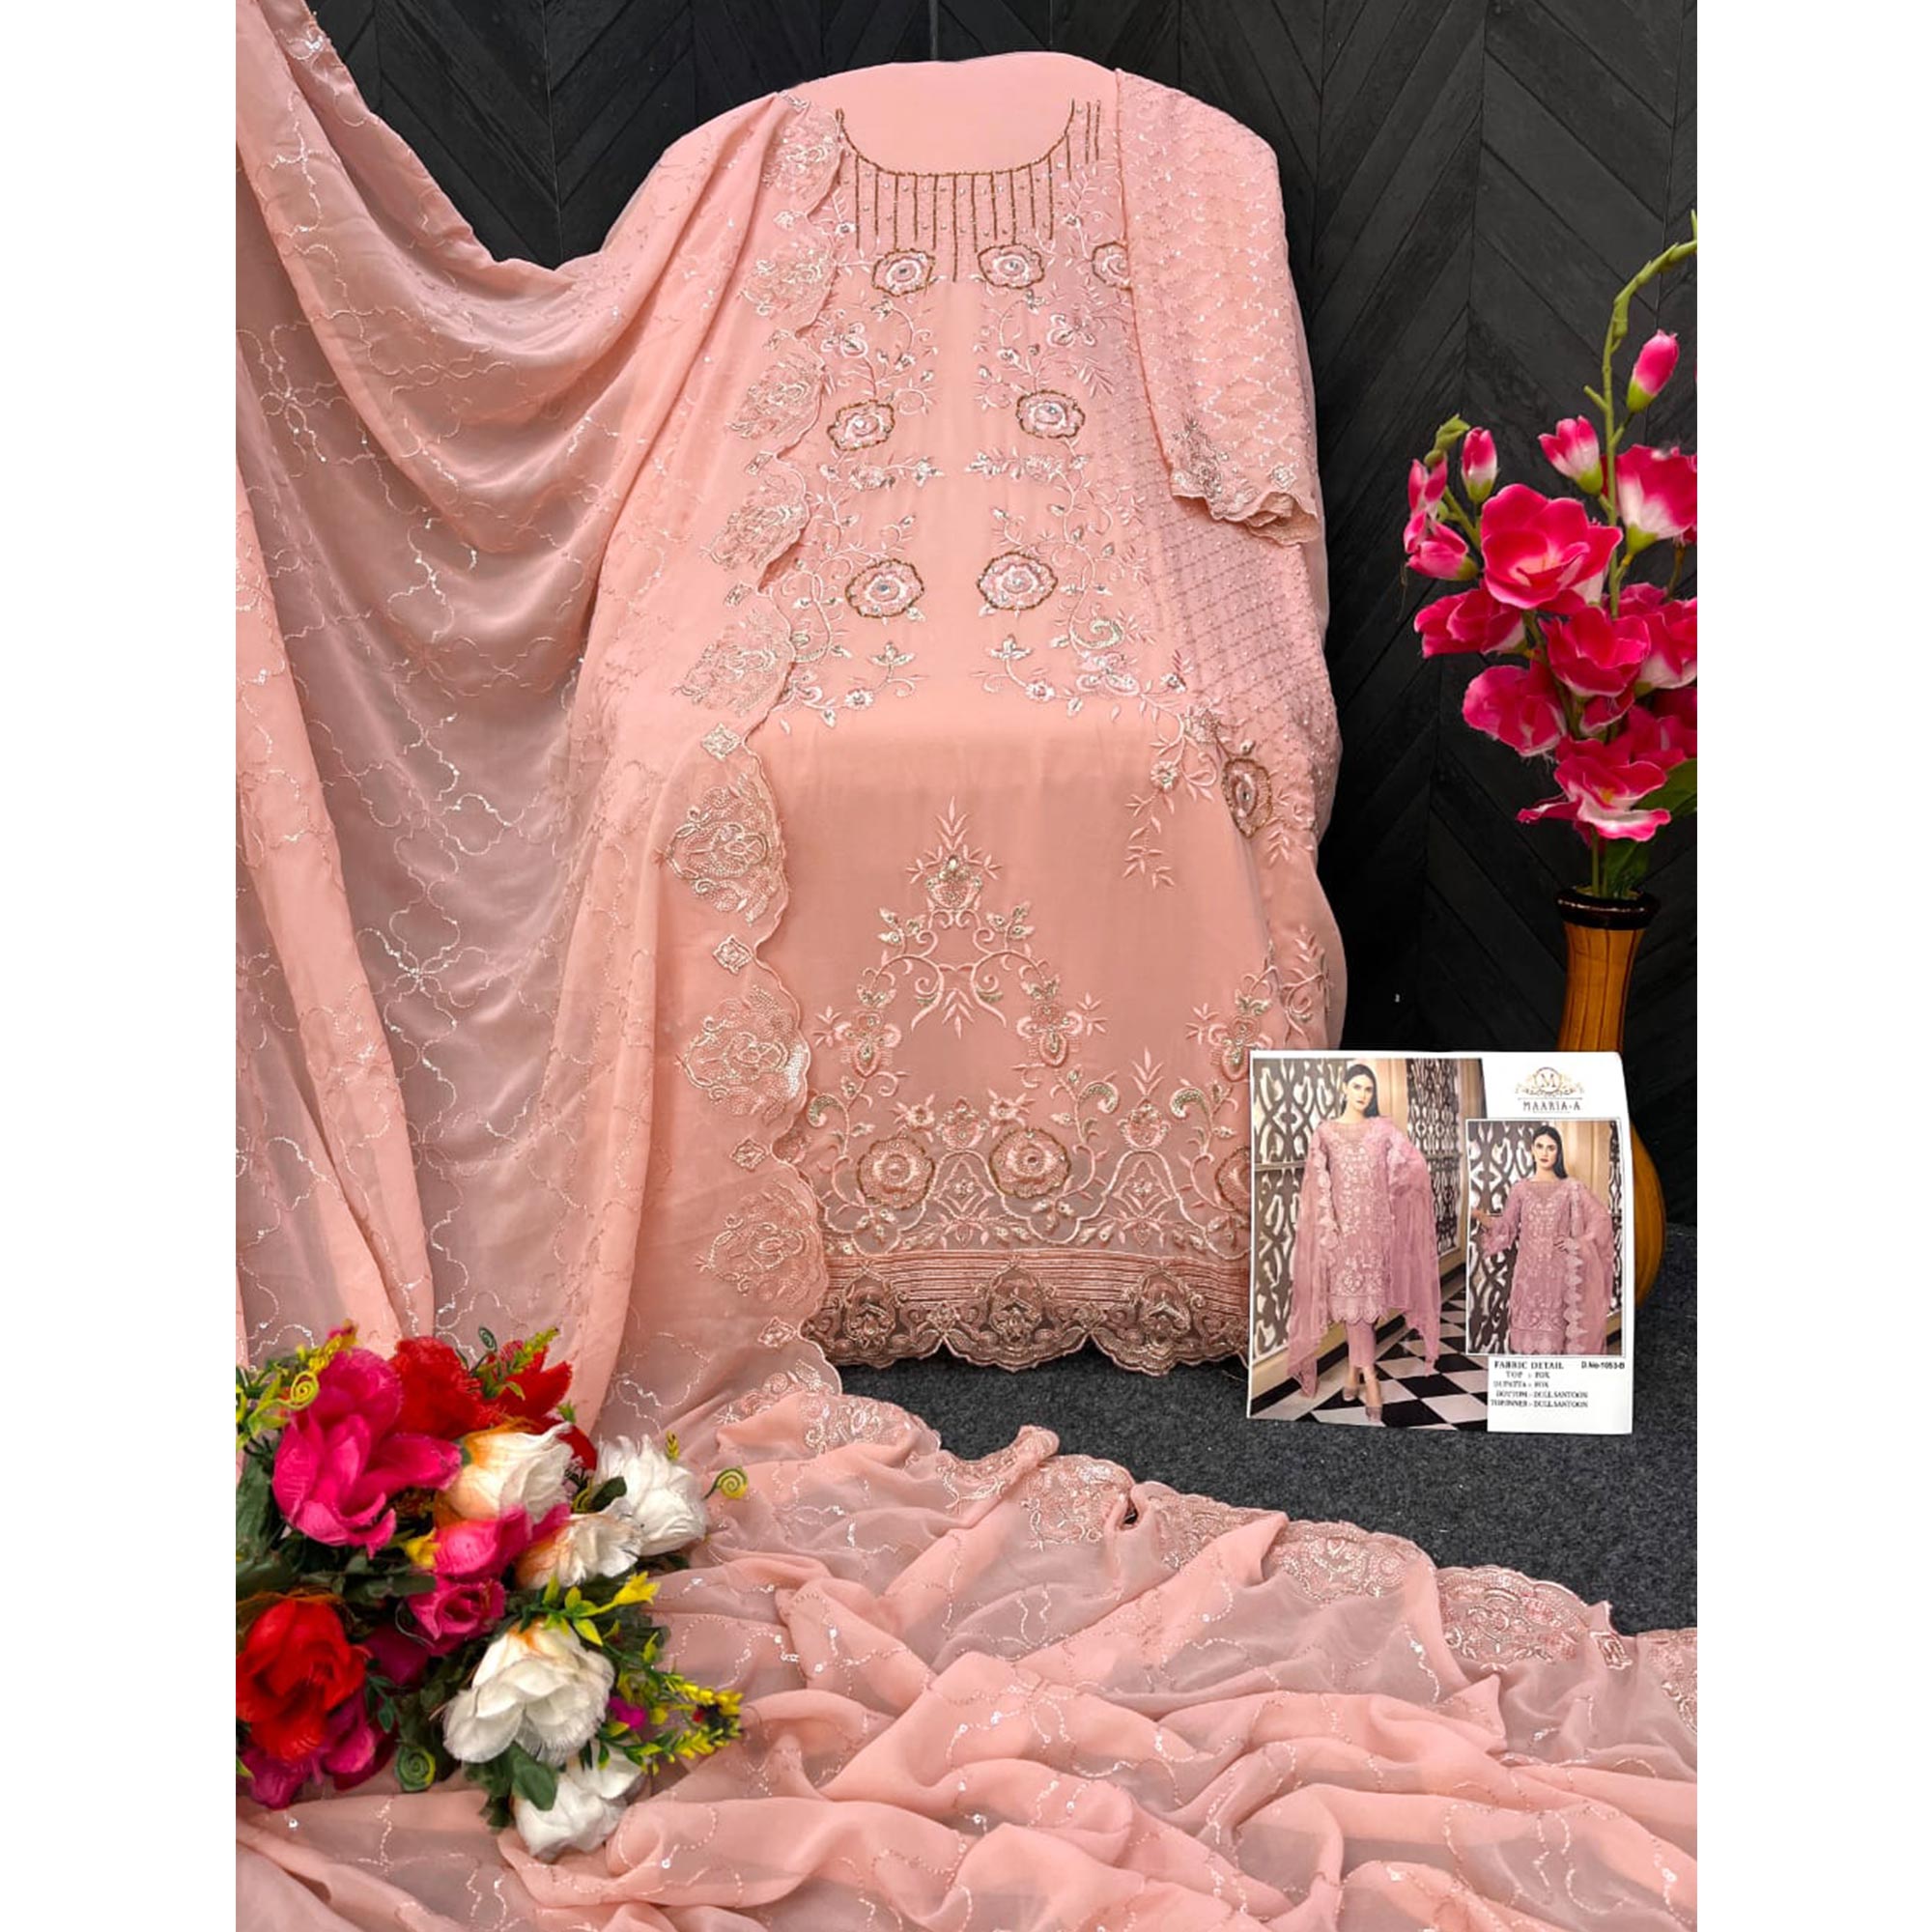 Peach Floral Embroidered Georgette Semi Stitched Pakistani Suit